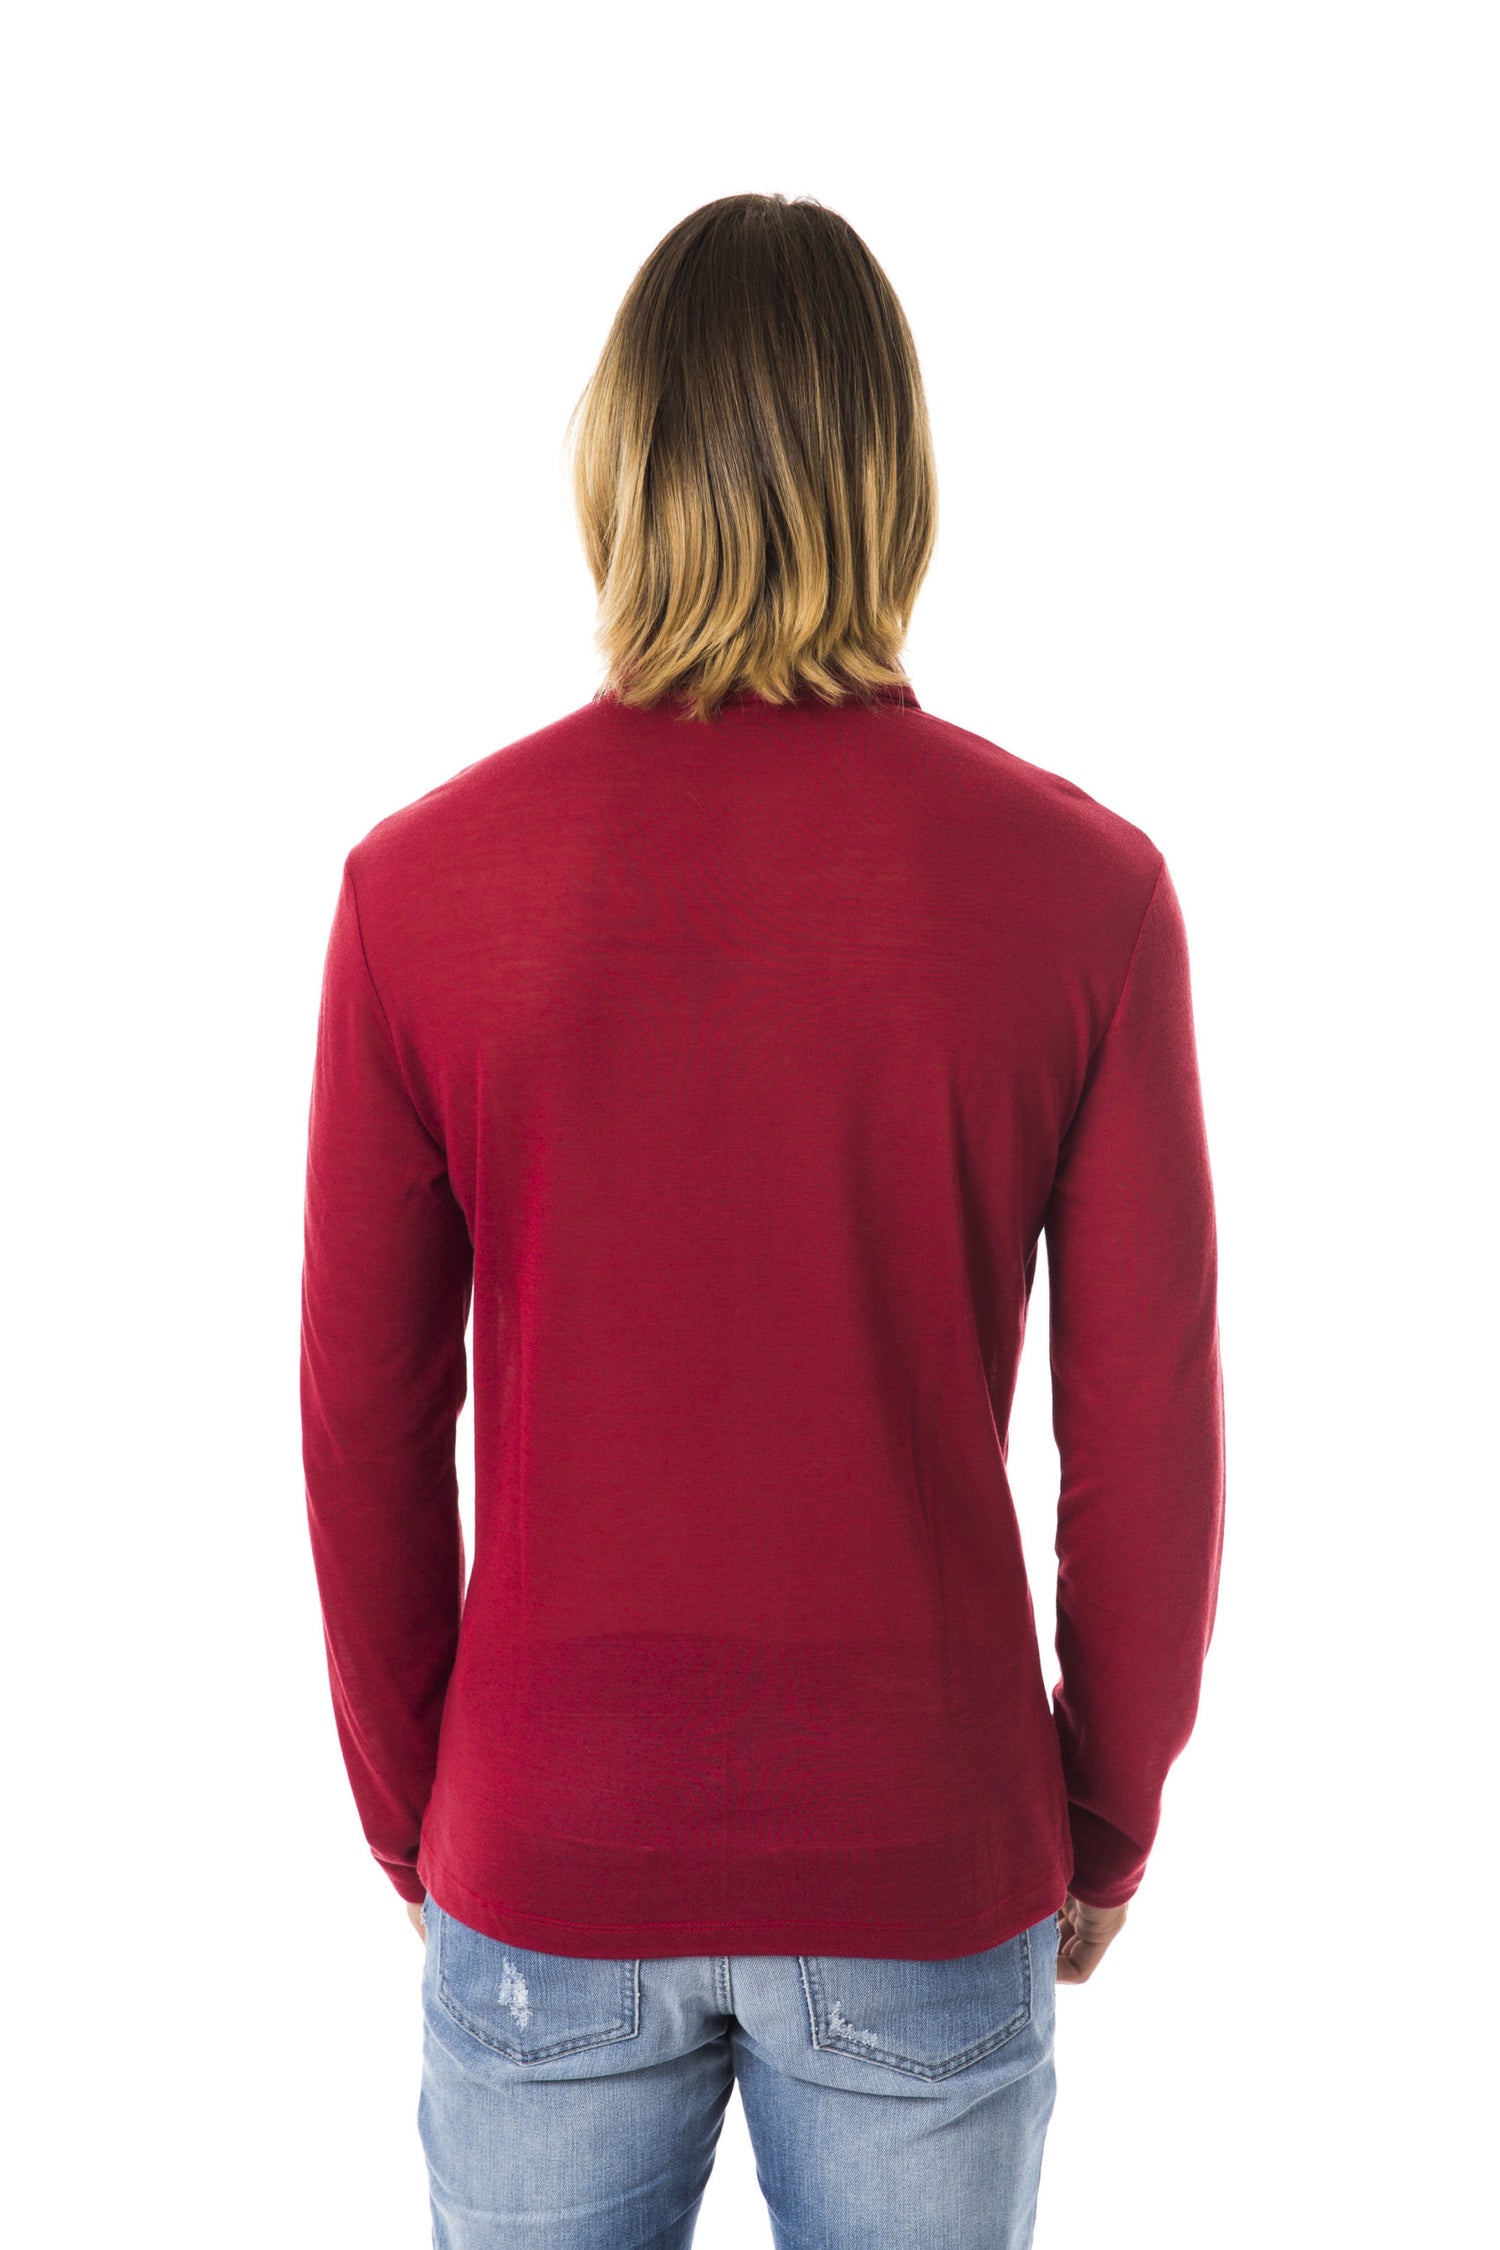 Red Polyester T-Shirt